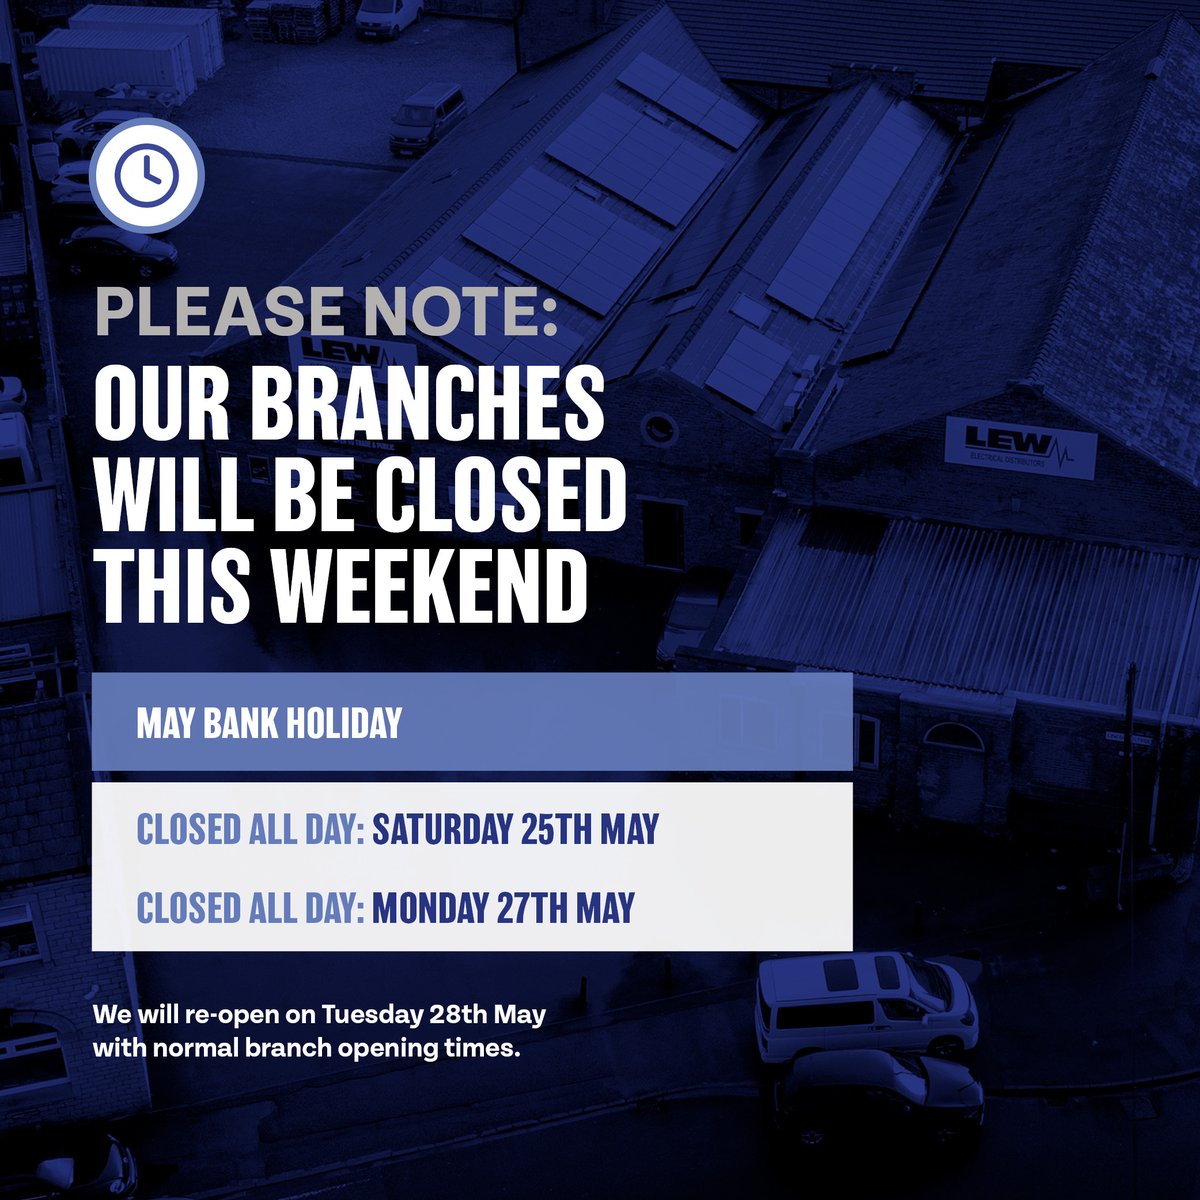 Just a reminder our branches will closed on Saturday 25th May and Monday 27th May for the Bank Holiday weekend. Please speak to your Account Manager if you have any questions. lewelectrical.co.uk/branches